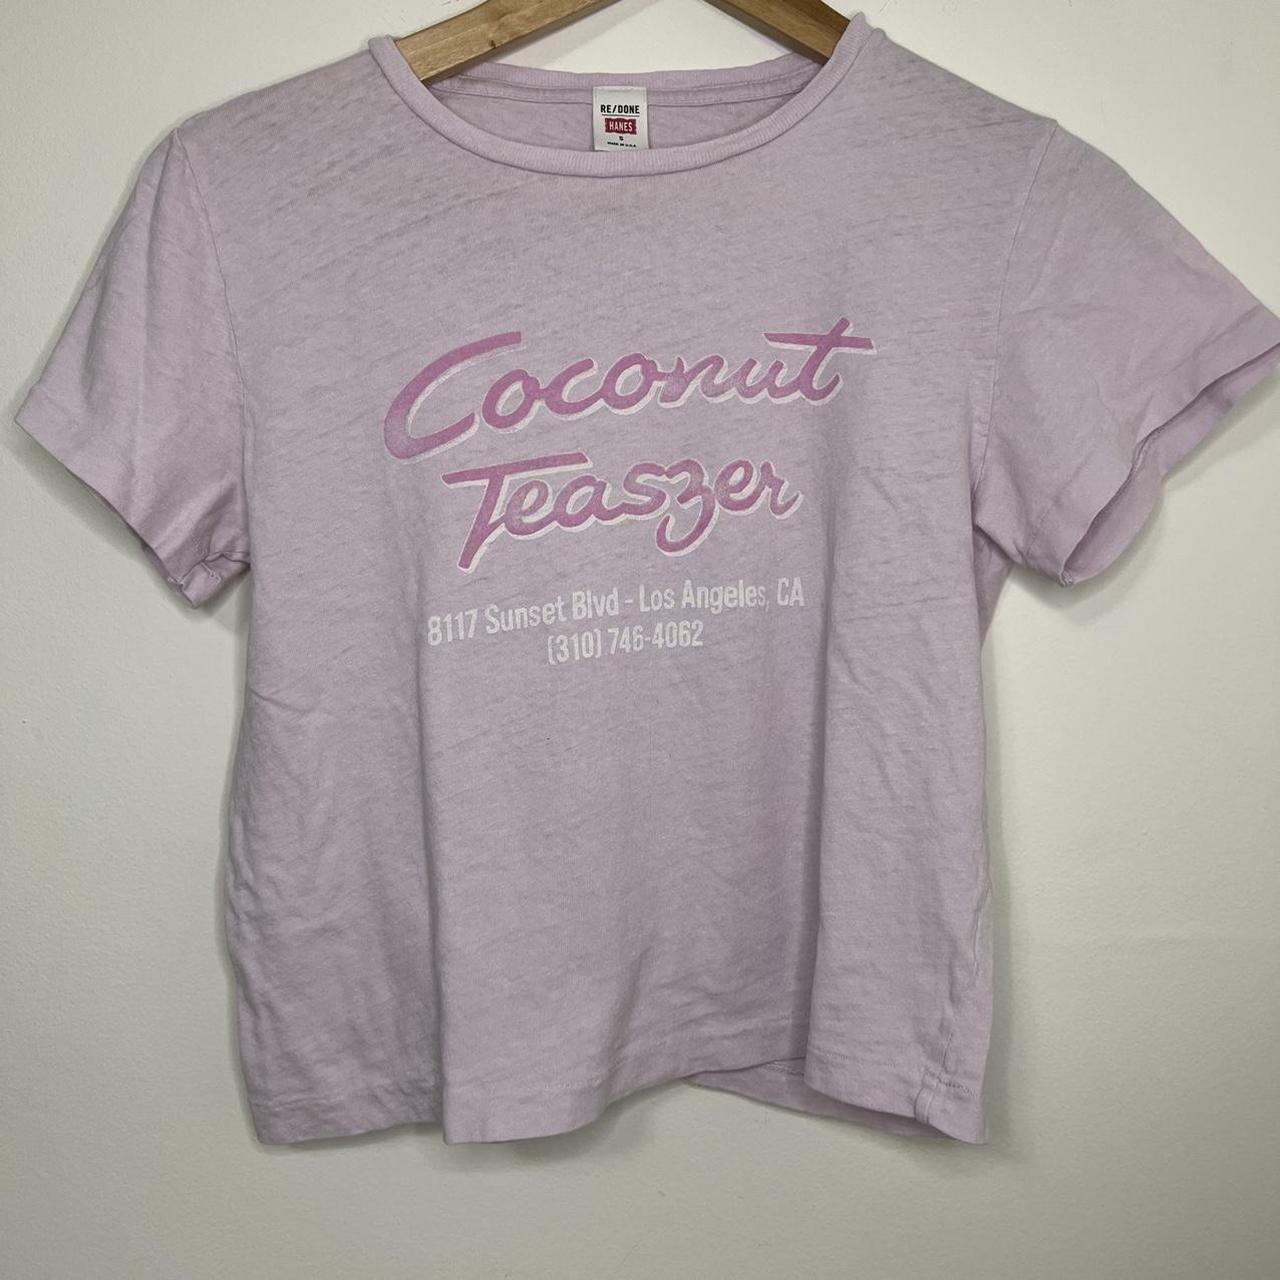 RE/DONE Women's White and Purple T-shirt